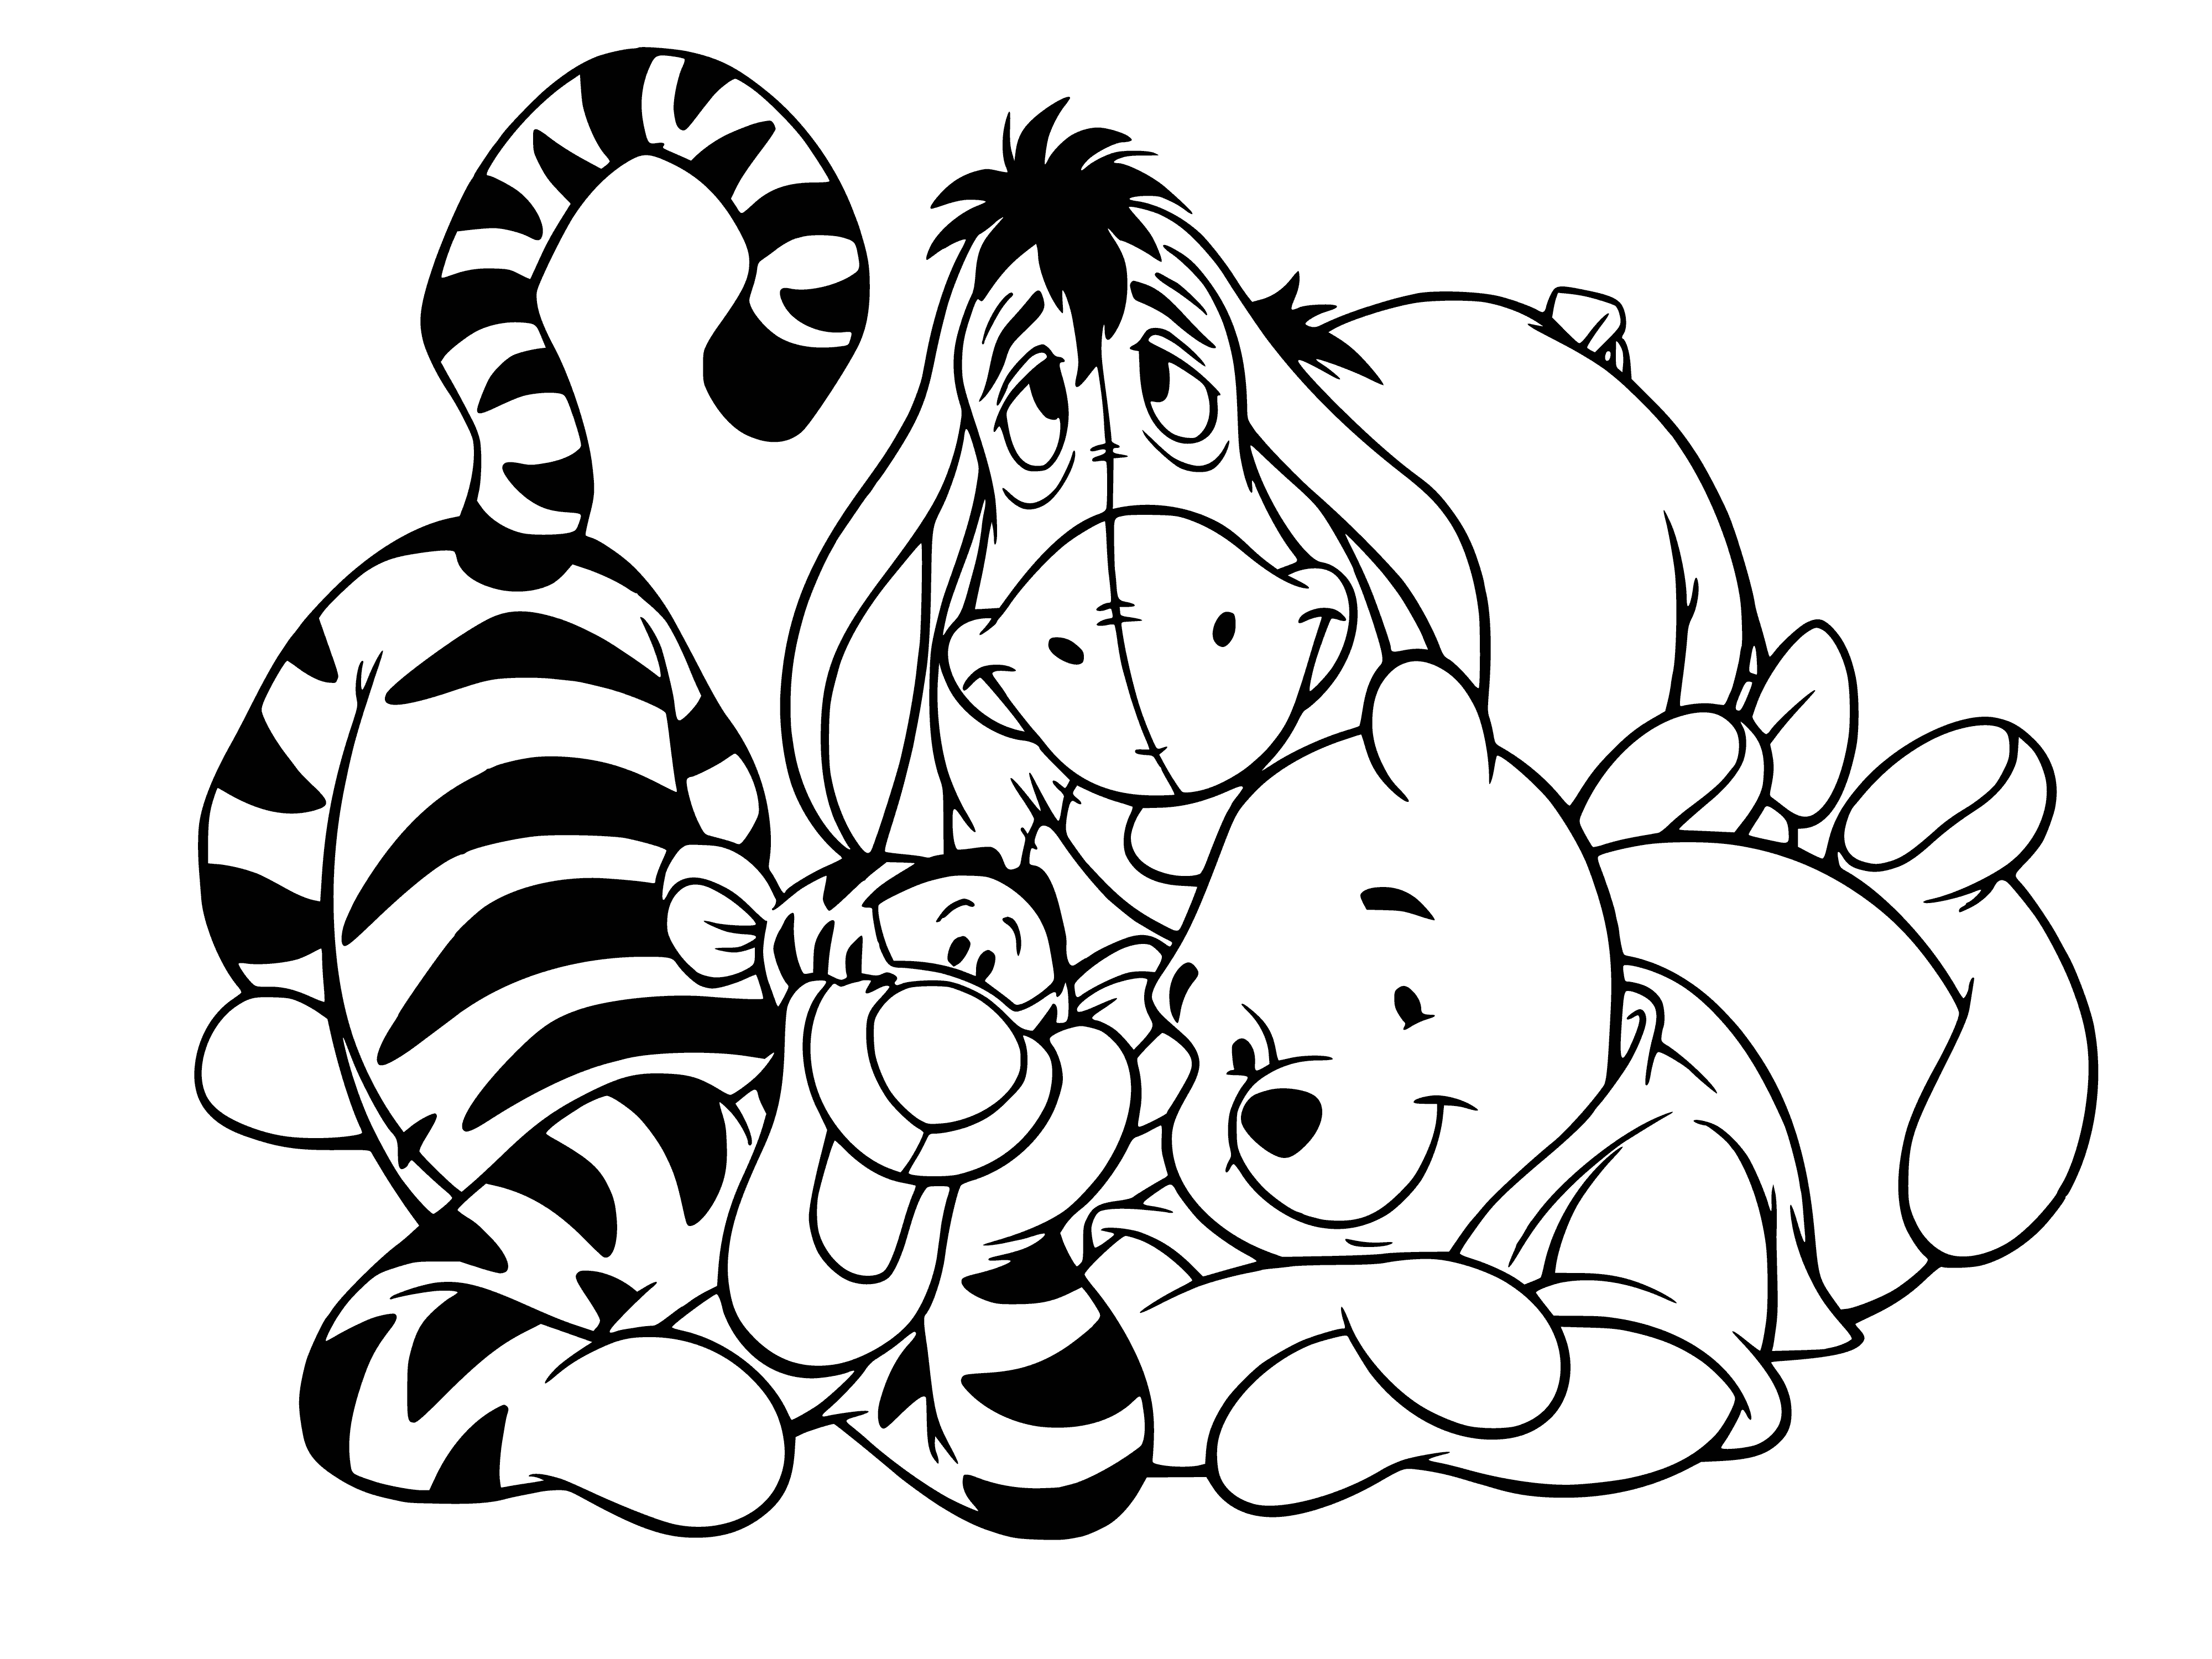 Tiger cub, Donkey Eeyore and bear cub Winnie coloring page